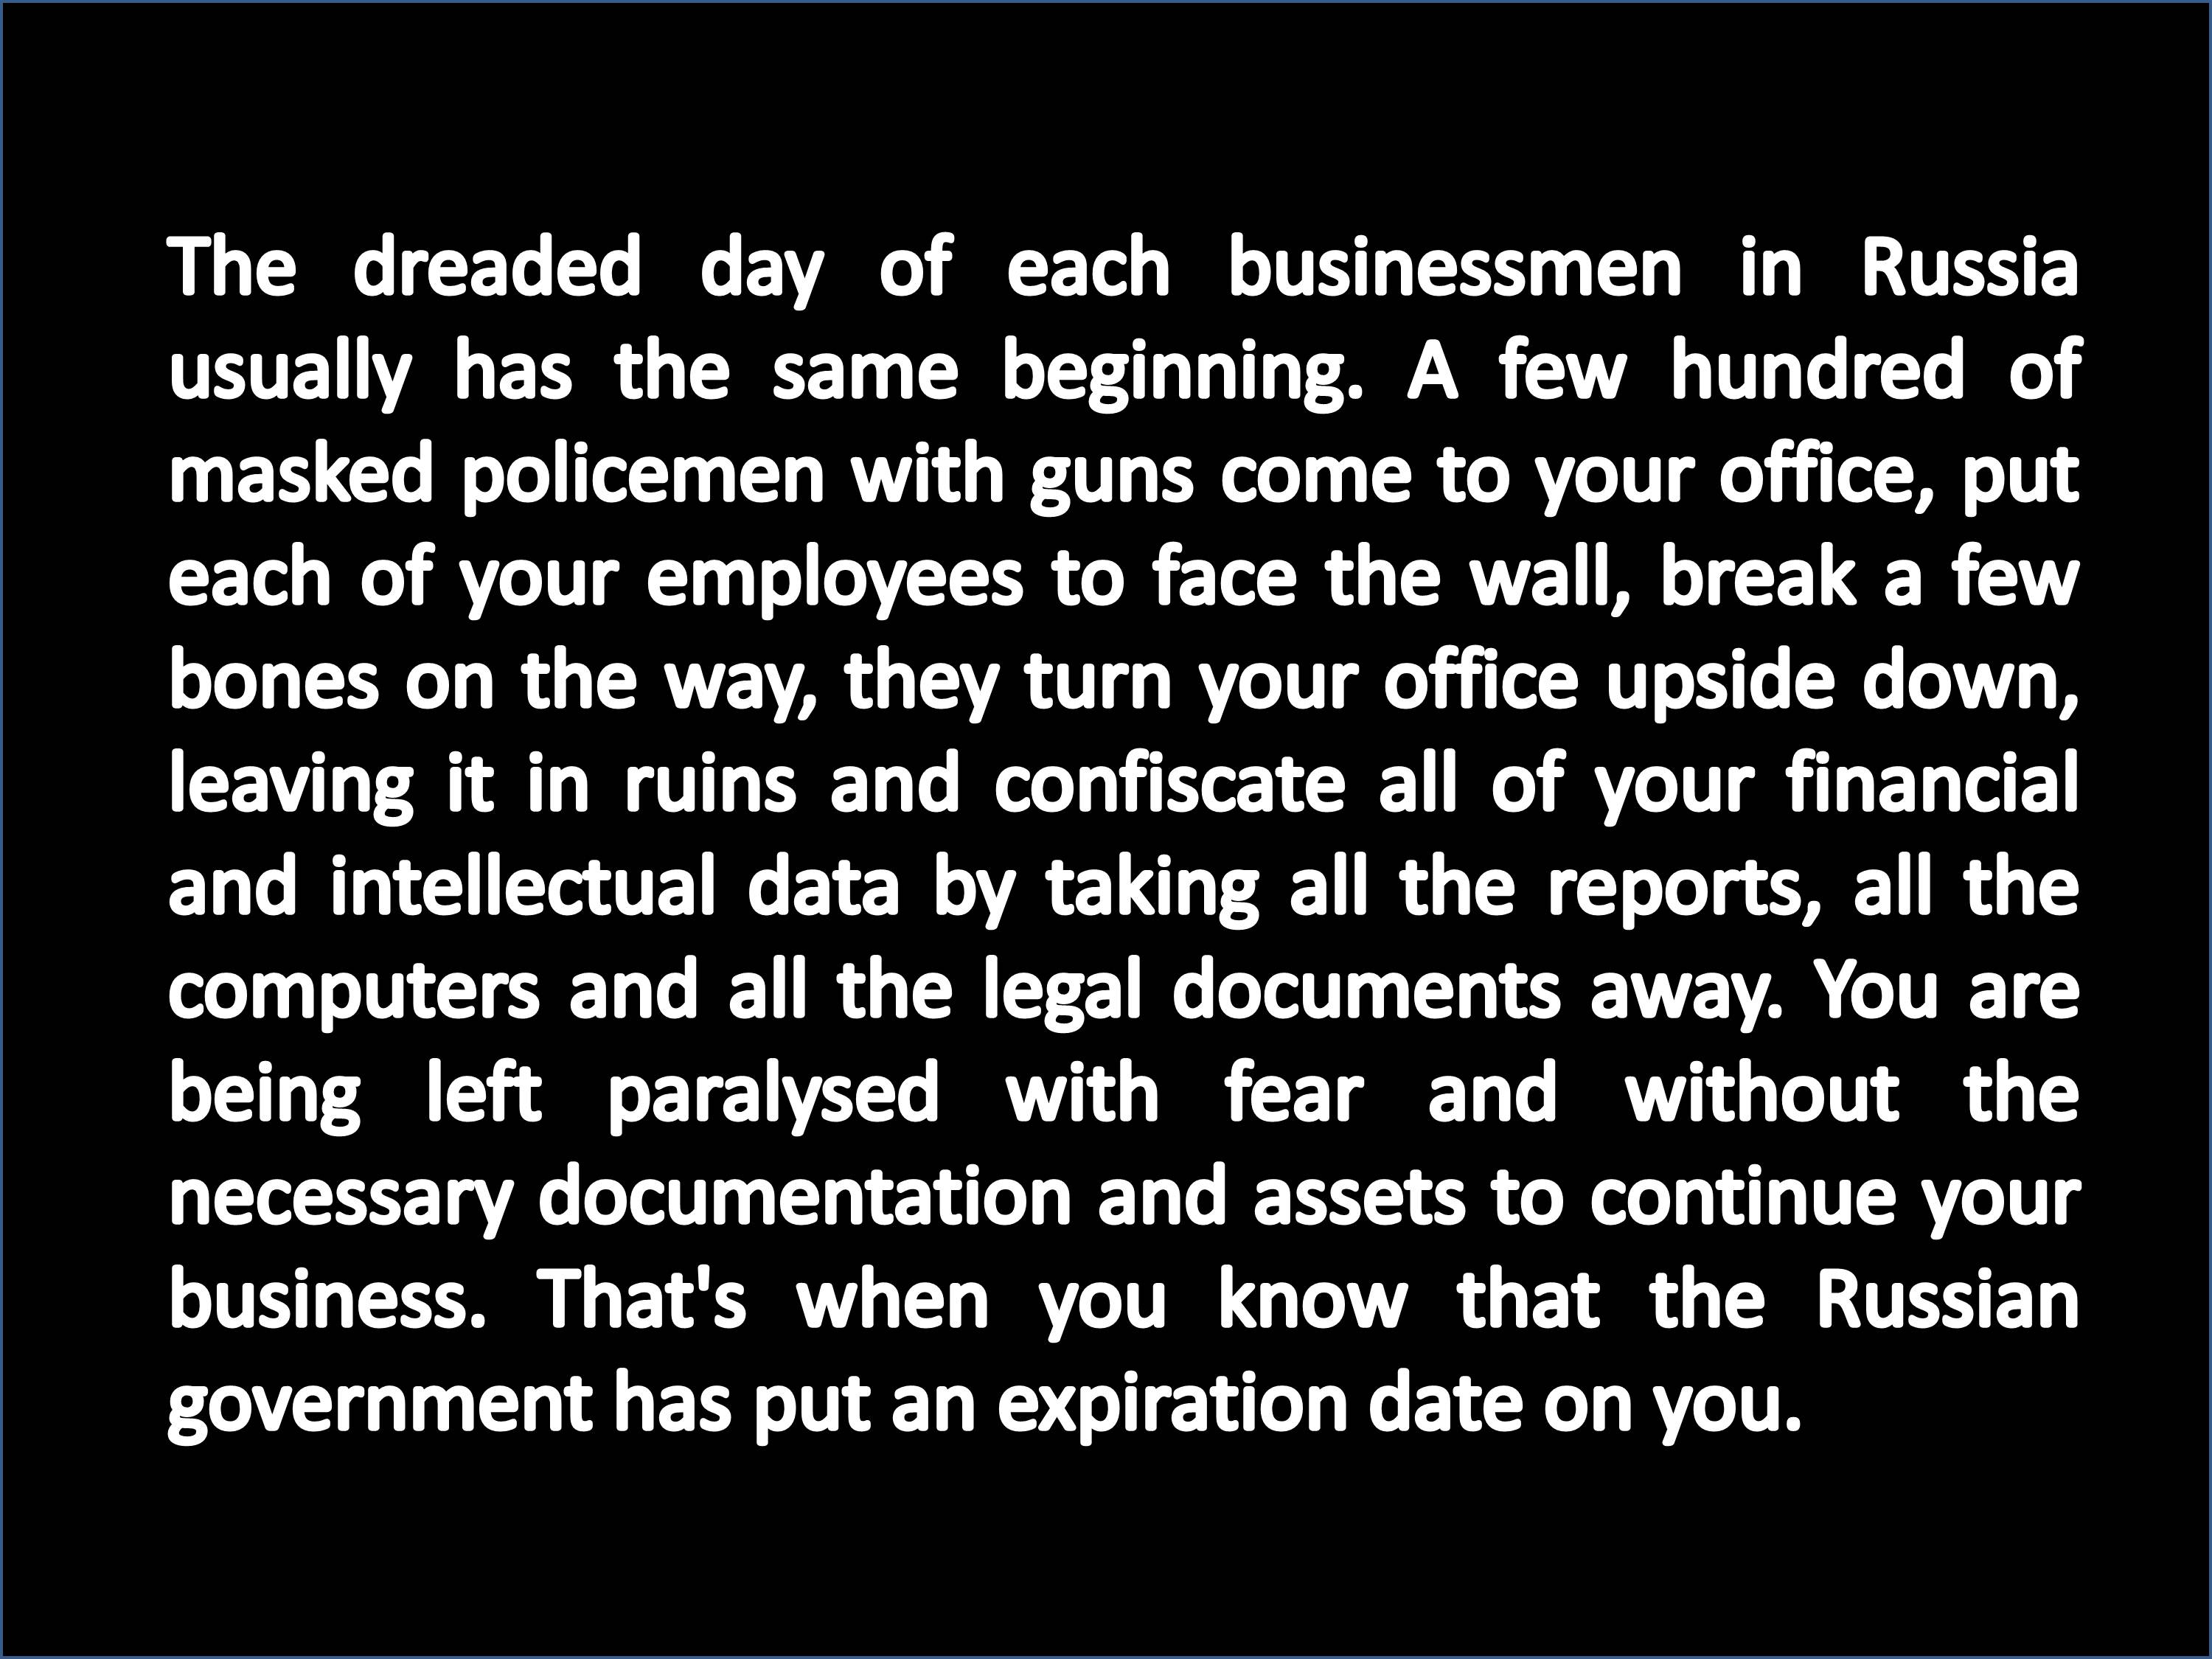 2 The dreaded day of each businessmen in Russia usually has the same beginning- supportthebitkovs.com